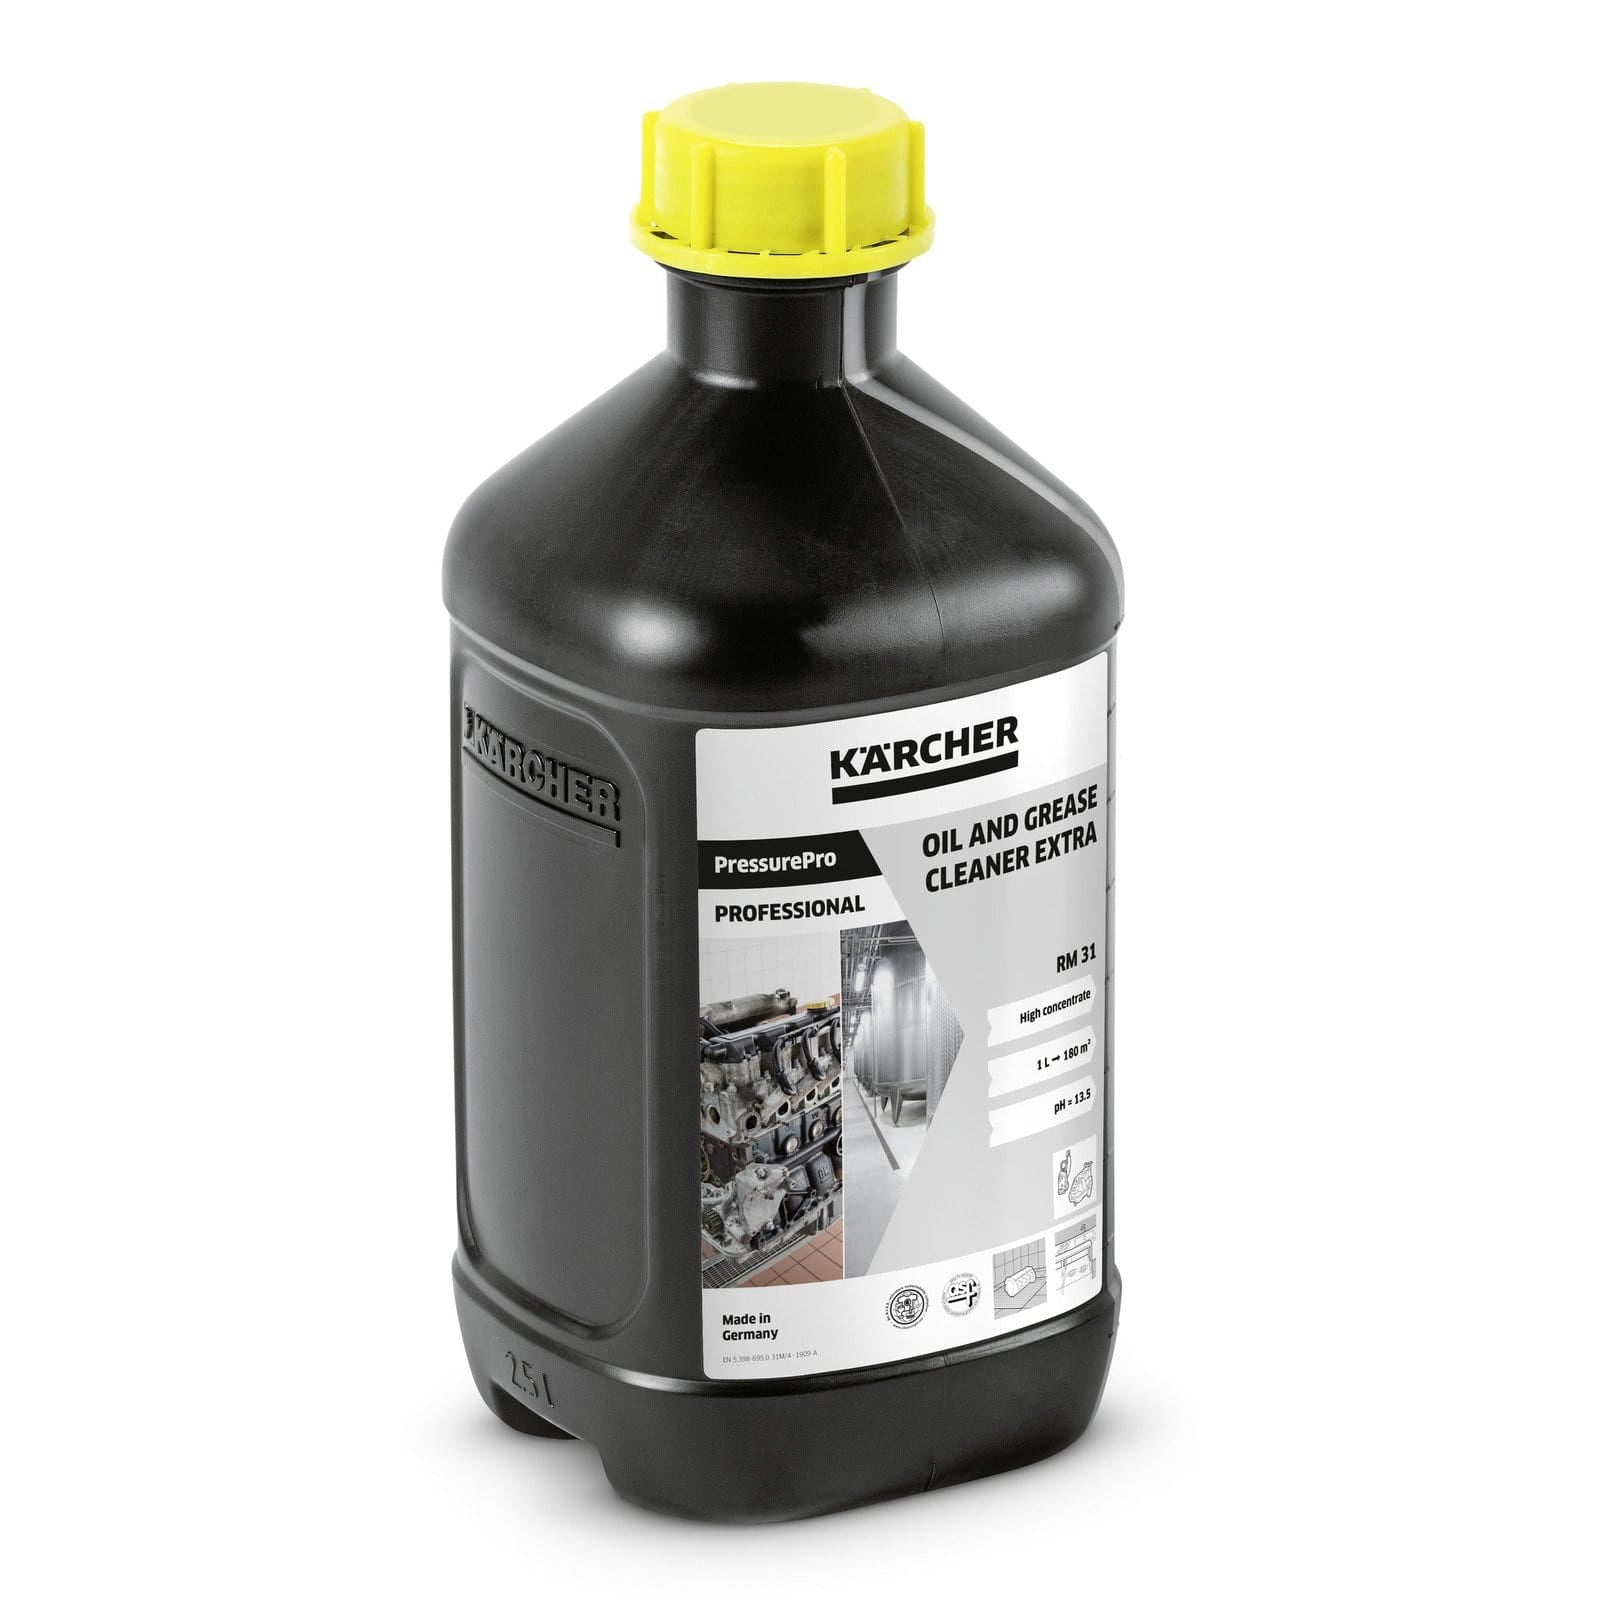 Karcher PressurePro Oil and Grease Cleaner Extra RM 31, 2.5L | Supply Master | Accra, Ghana Tools Building Steel Engineering Hardware tool